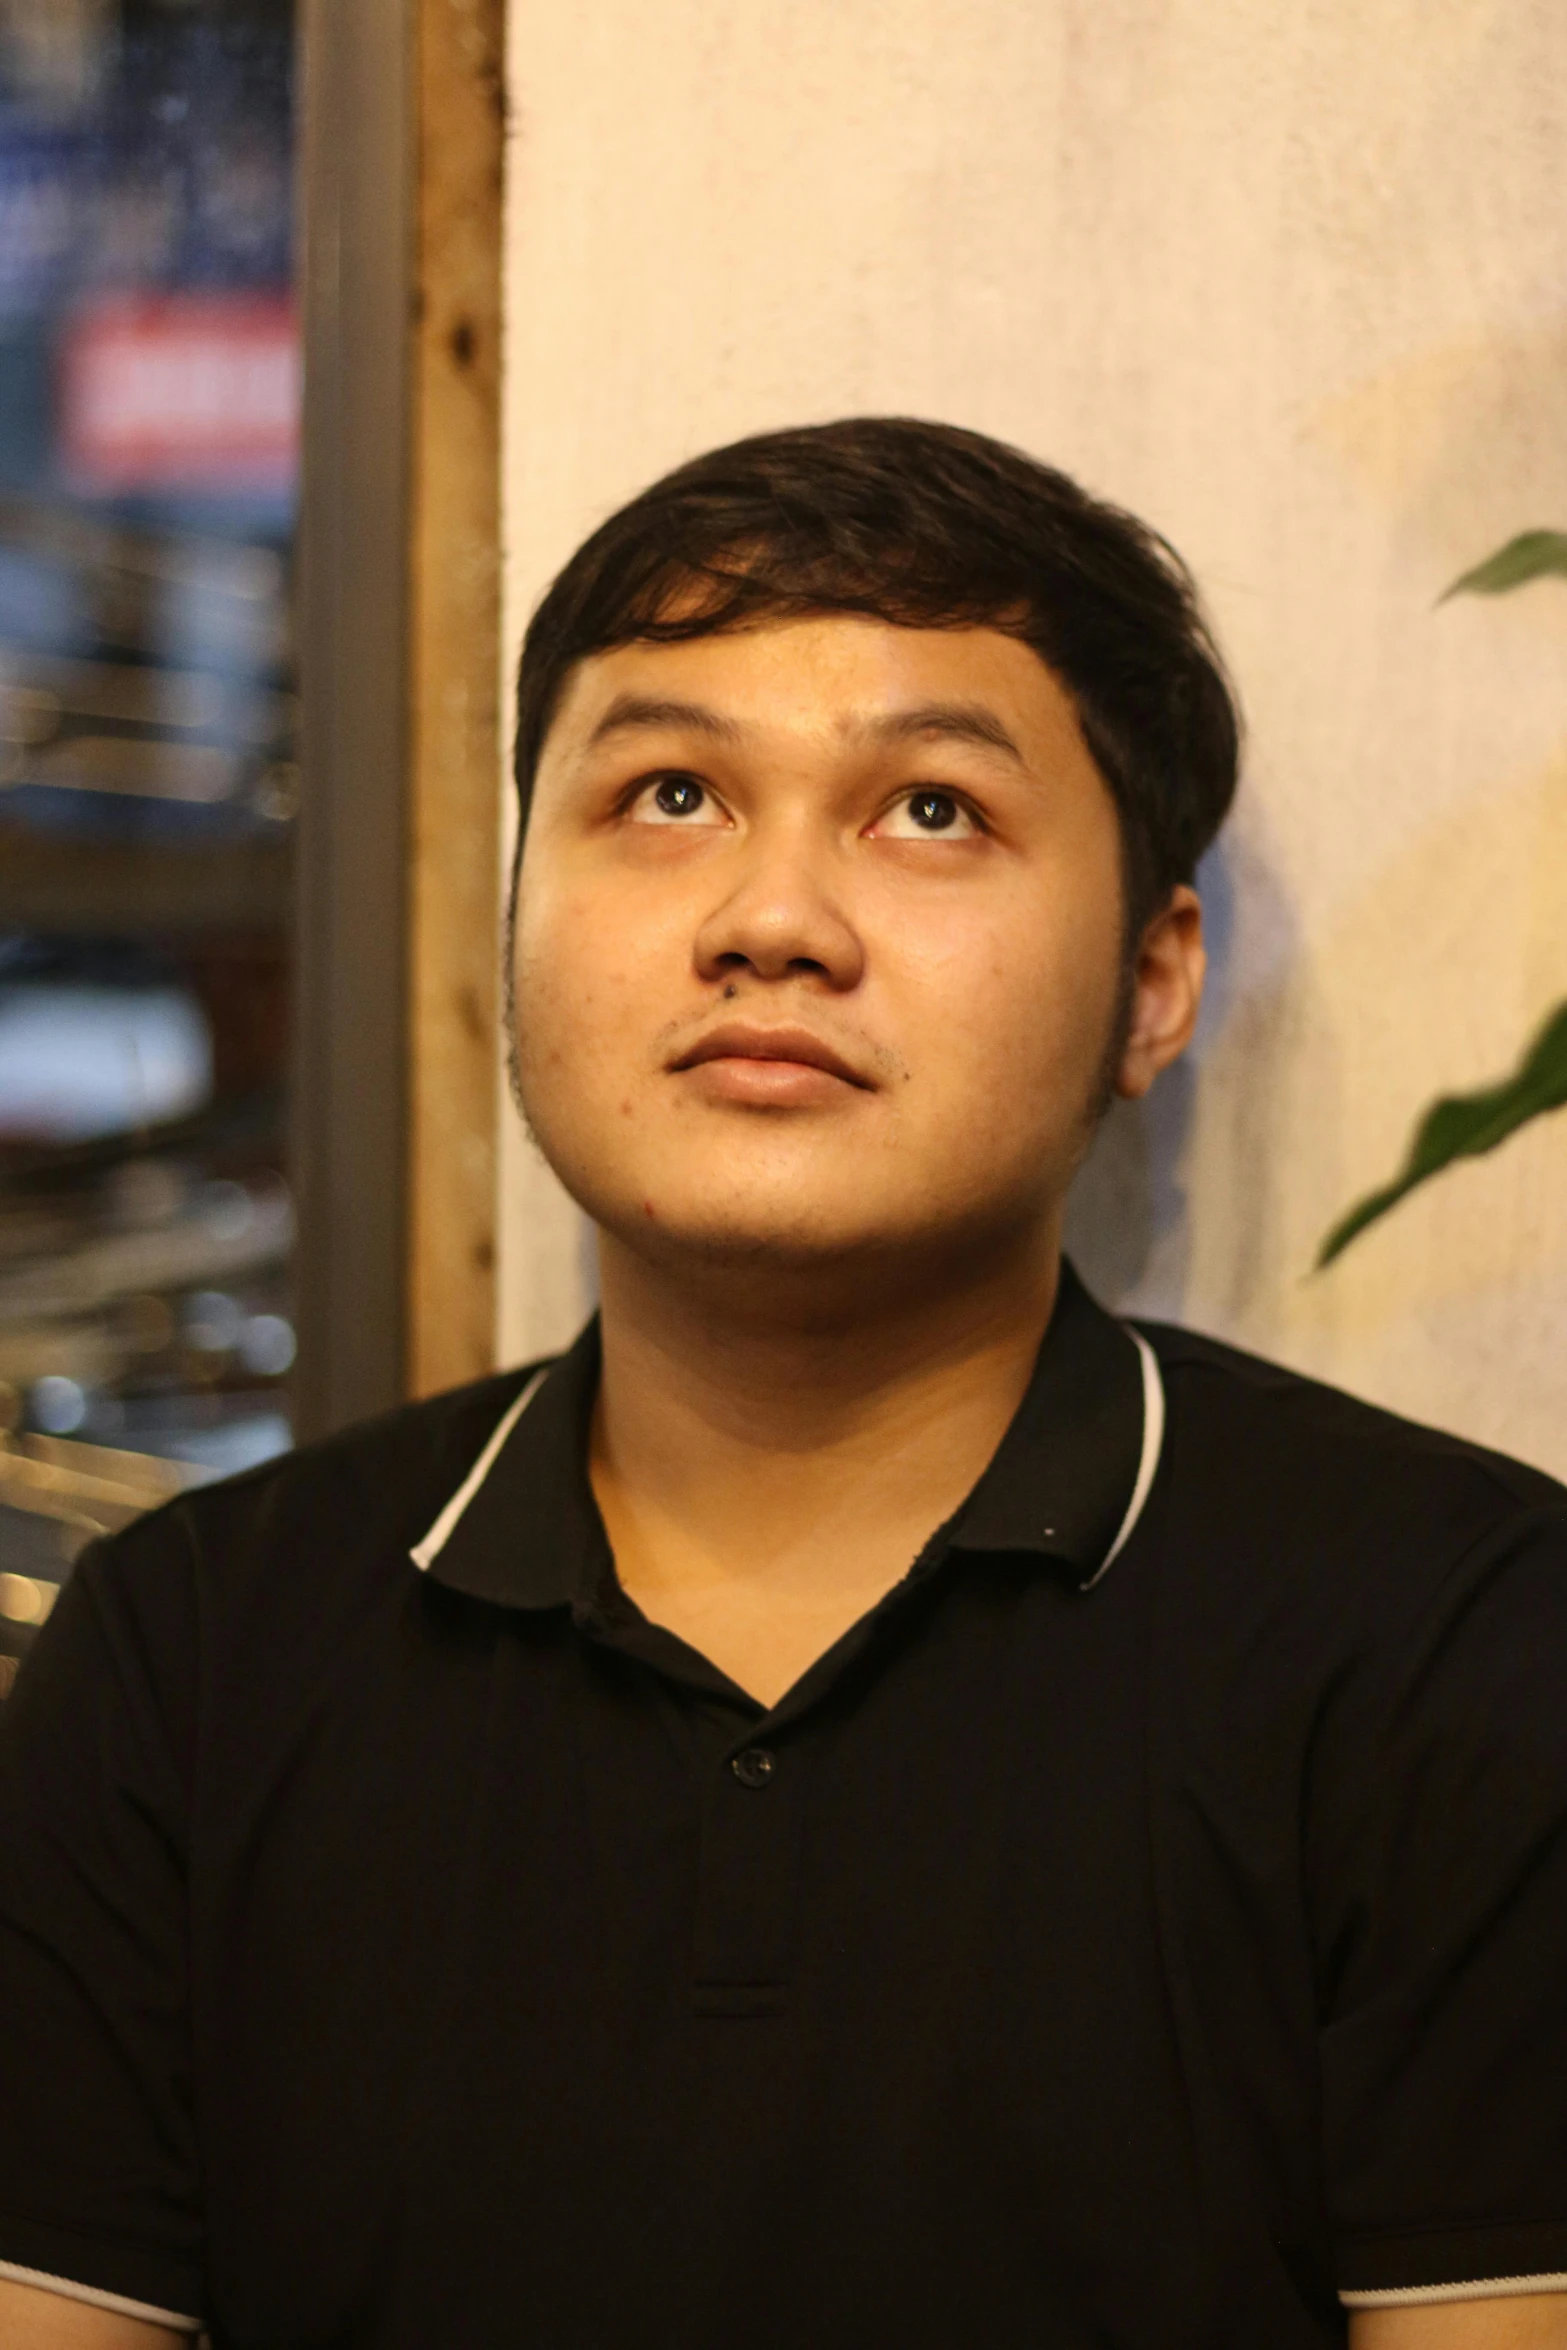 a young man is staring straight ahead while wearing a black shirt